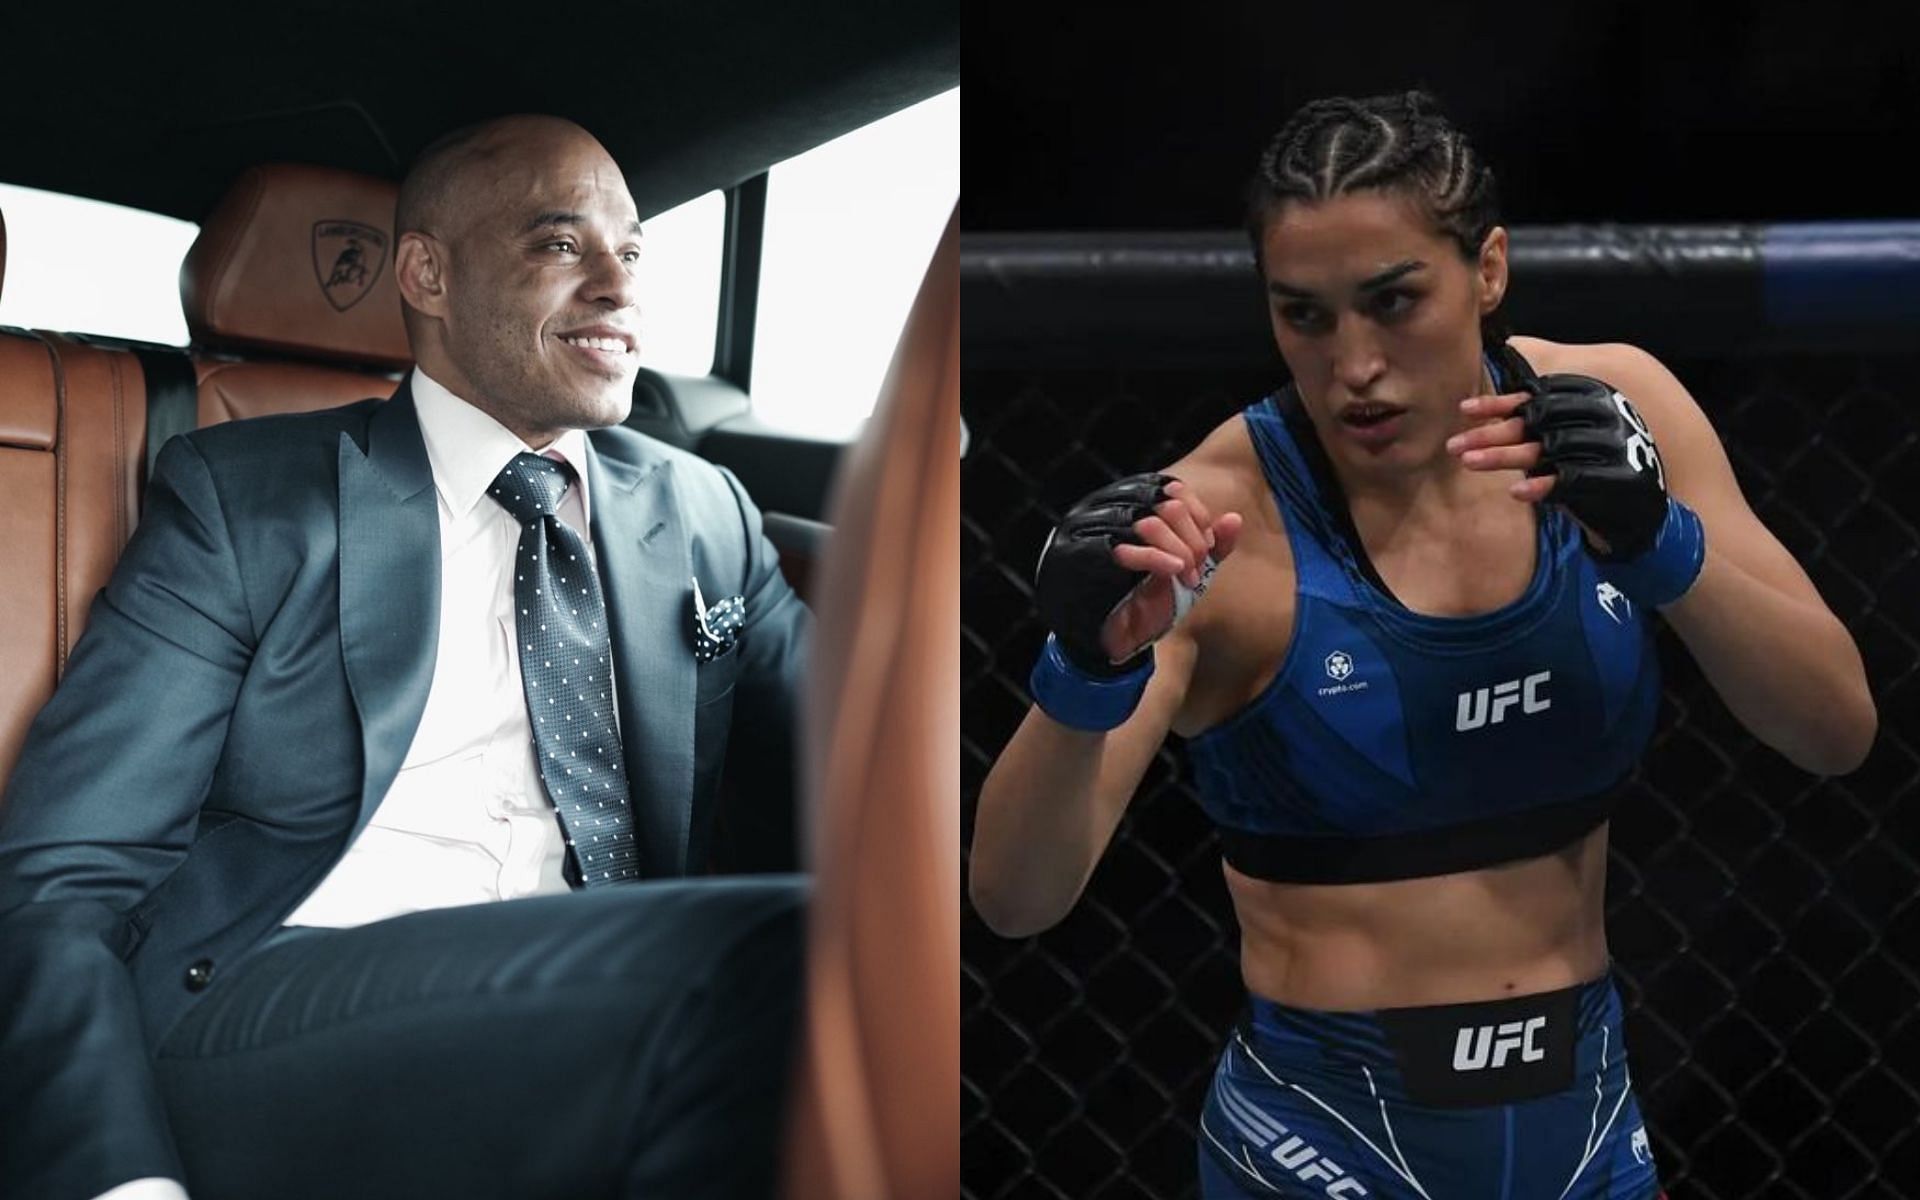 Ali Abdelaziz (left) is regarded as one of the top MMA managers, whereas Tatiana Suarez is heralded among the best MMA fighters in the world [Images courtesy: @aliabdelaziz and @tatianasuarezufc on Instagram]